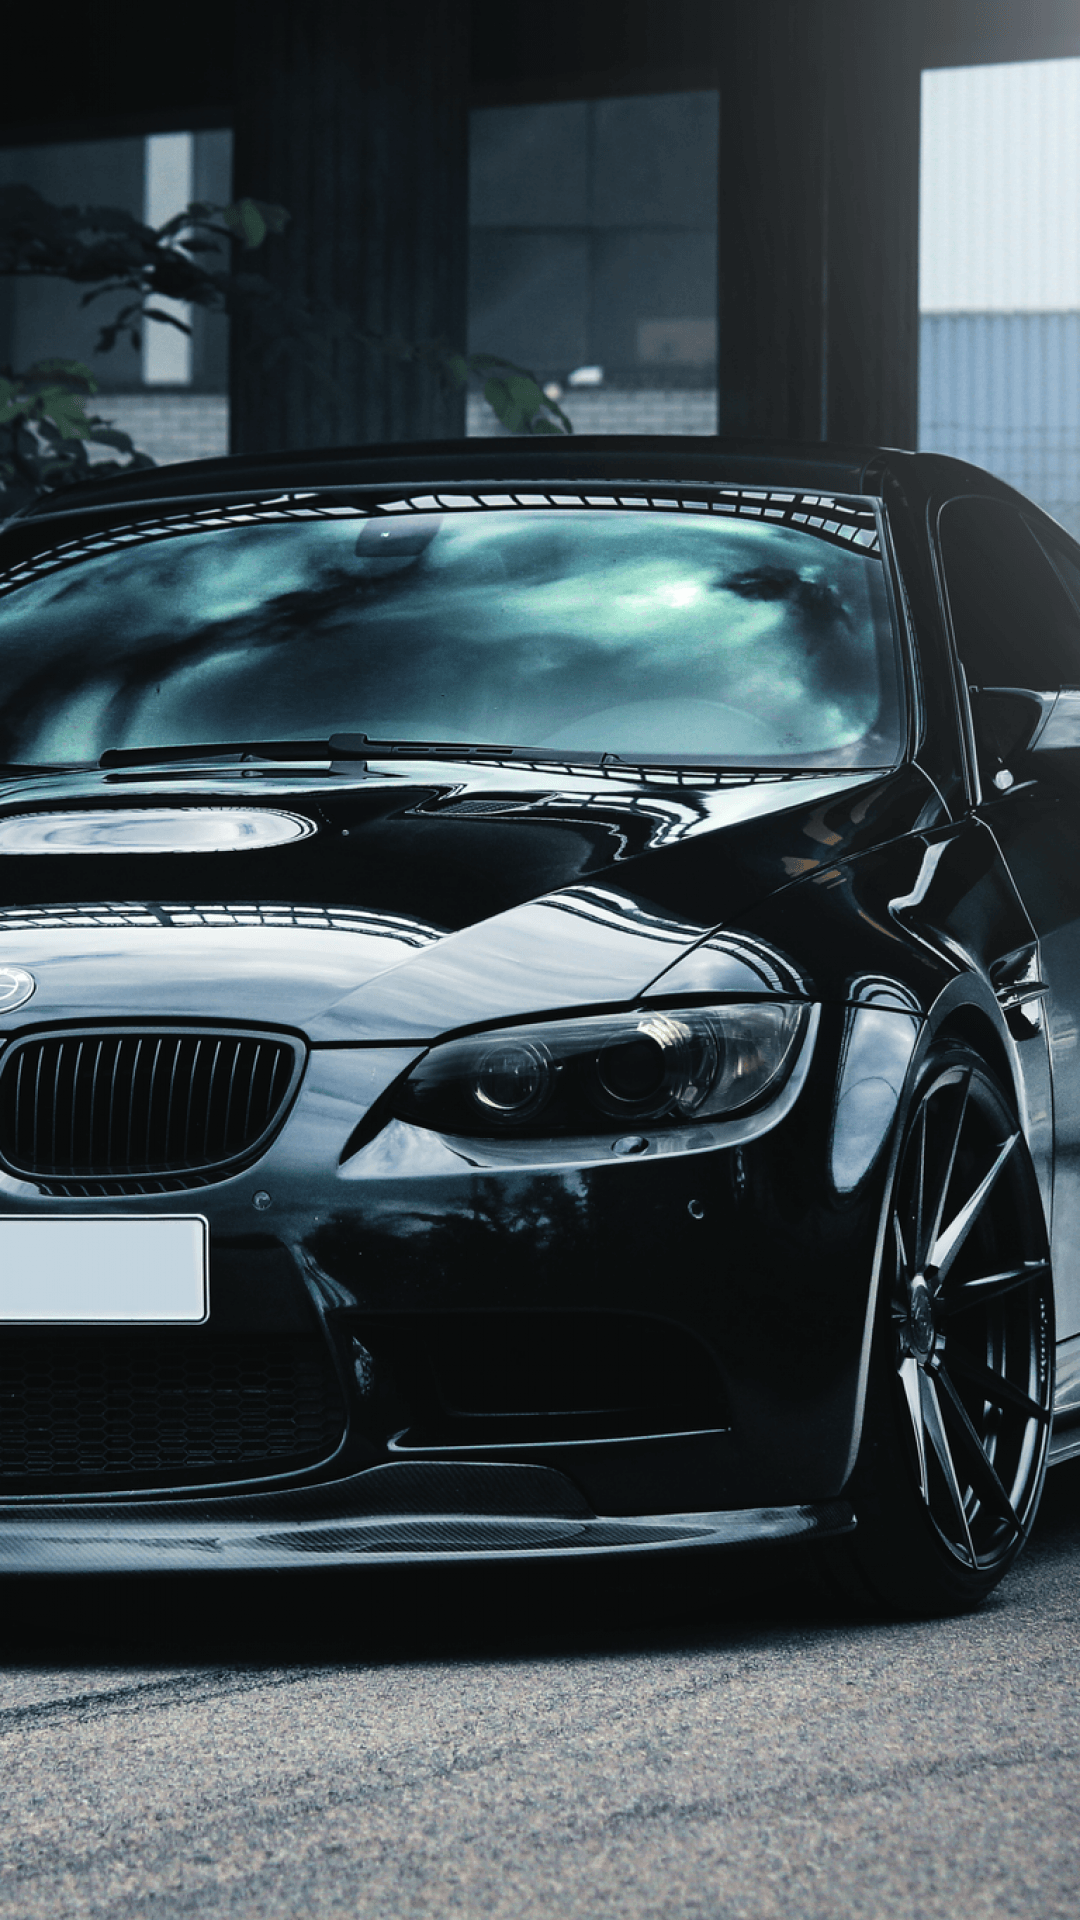 Download 1080x1920 Bmw, Black, Cars Wallpaper for iPhone iPhone